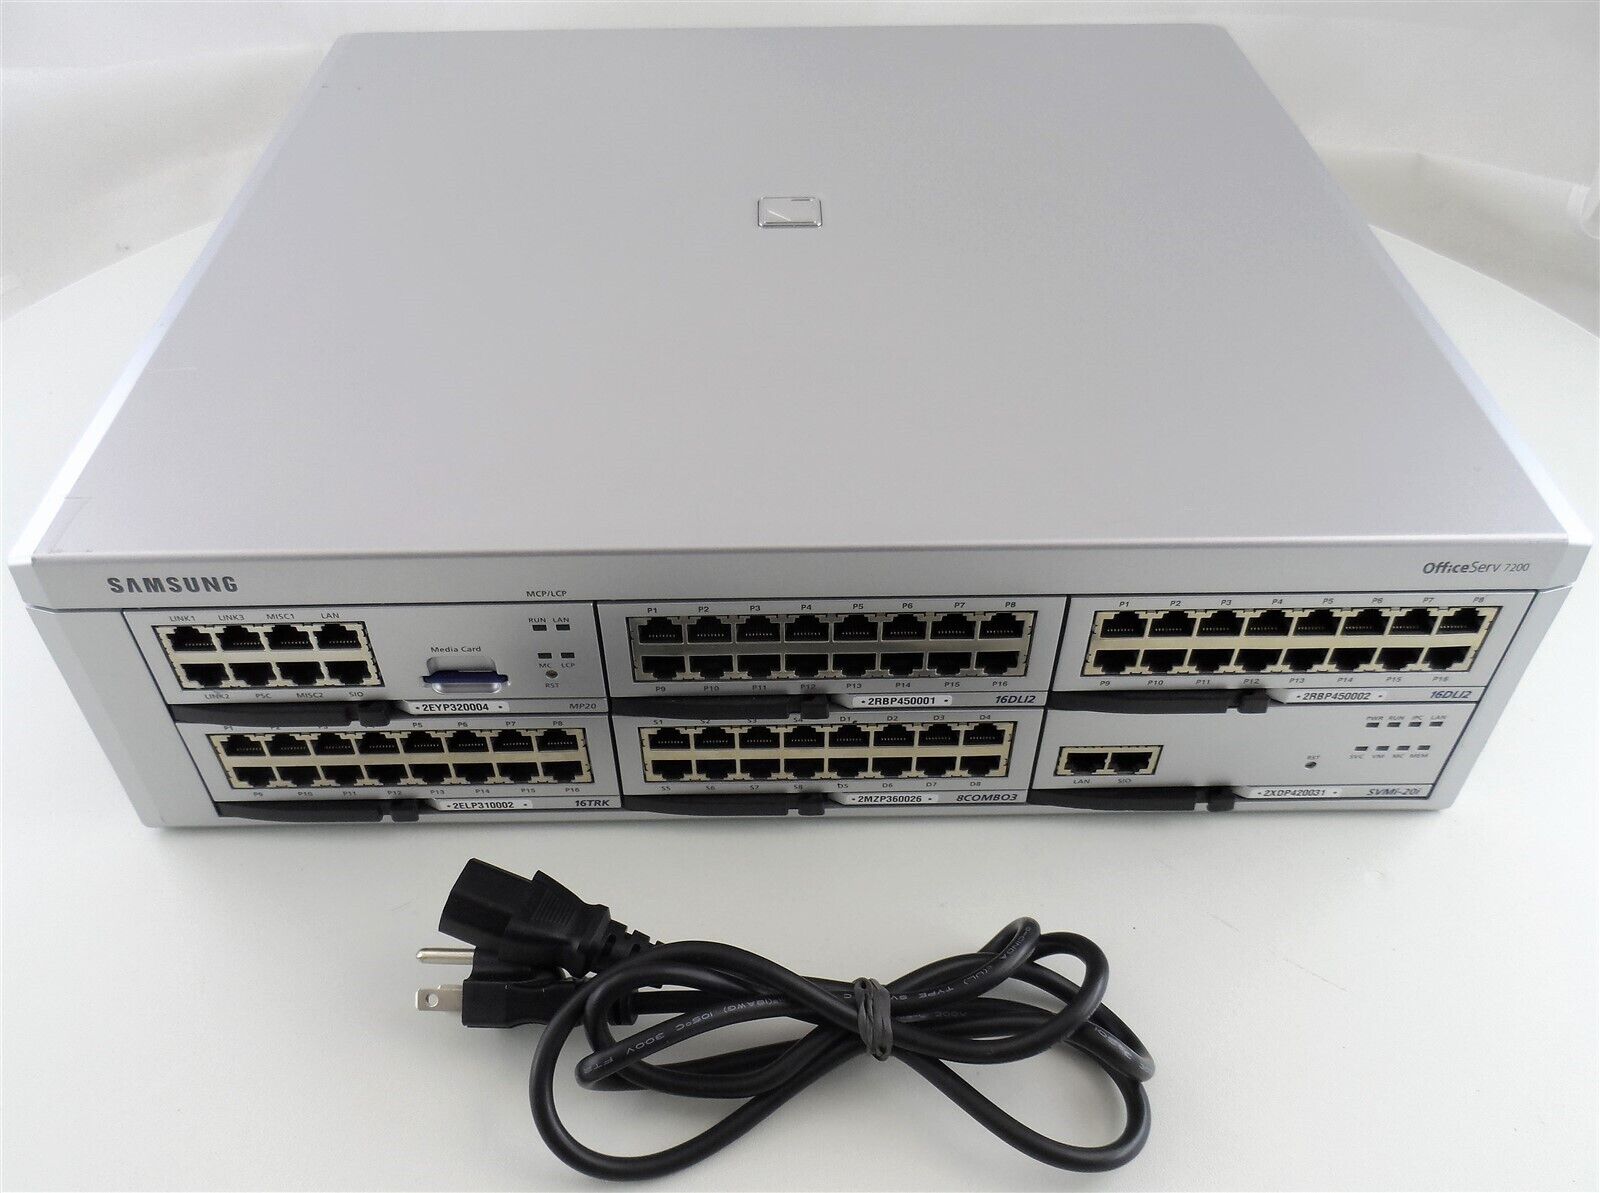 Samsung OfficeServ 7200 with MP20, 16TRK, 8COMBO3, 2x 16DLI2, SVMi-20i Used